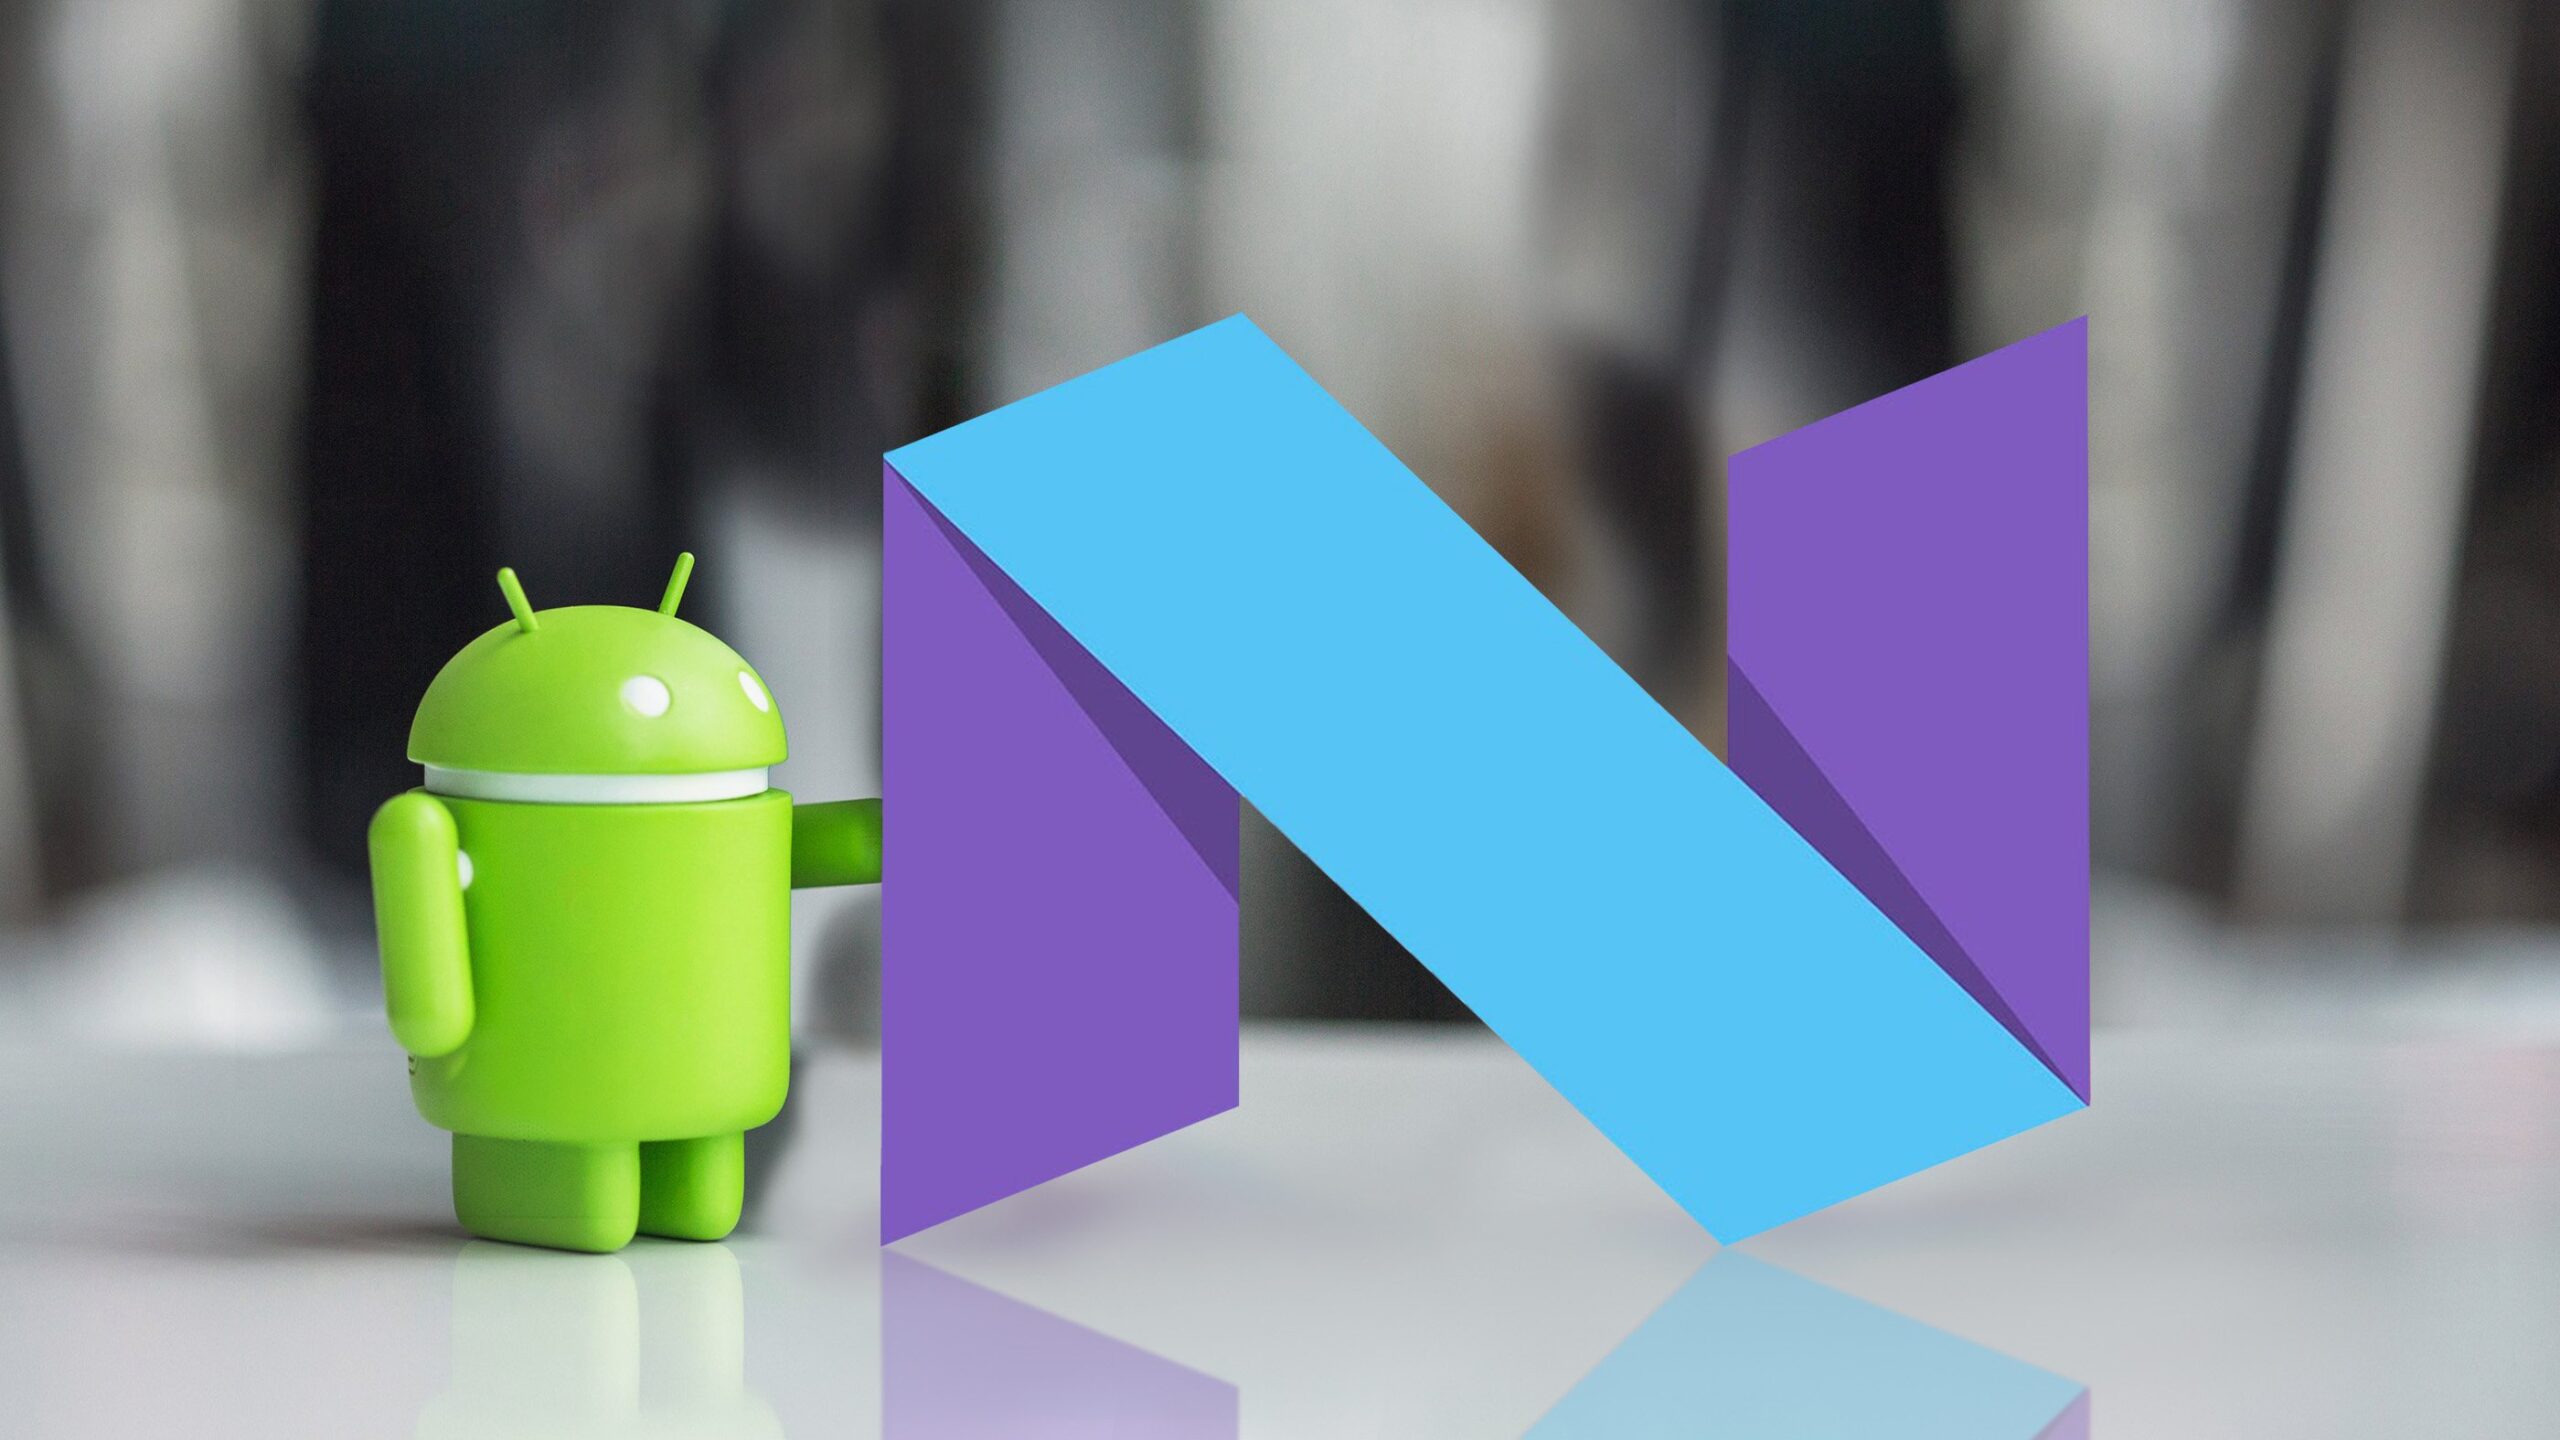 After the Nexus, Now Sony's Turn to Offer Android N